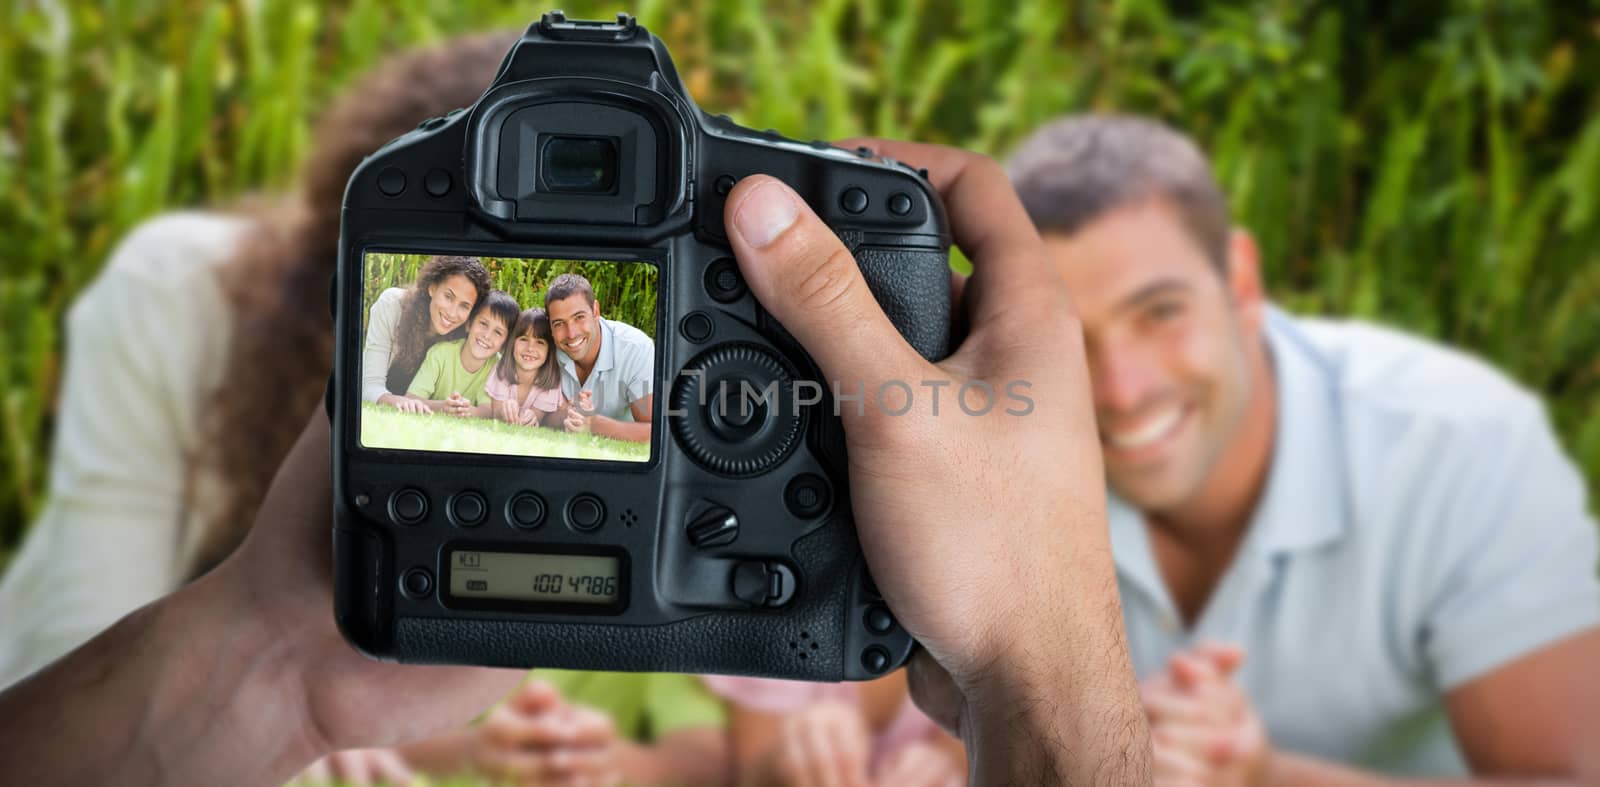 Cropped image of hands holding camera  against apps banner on abstract screen 